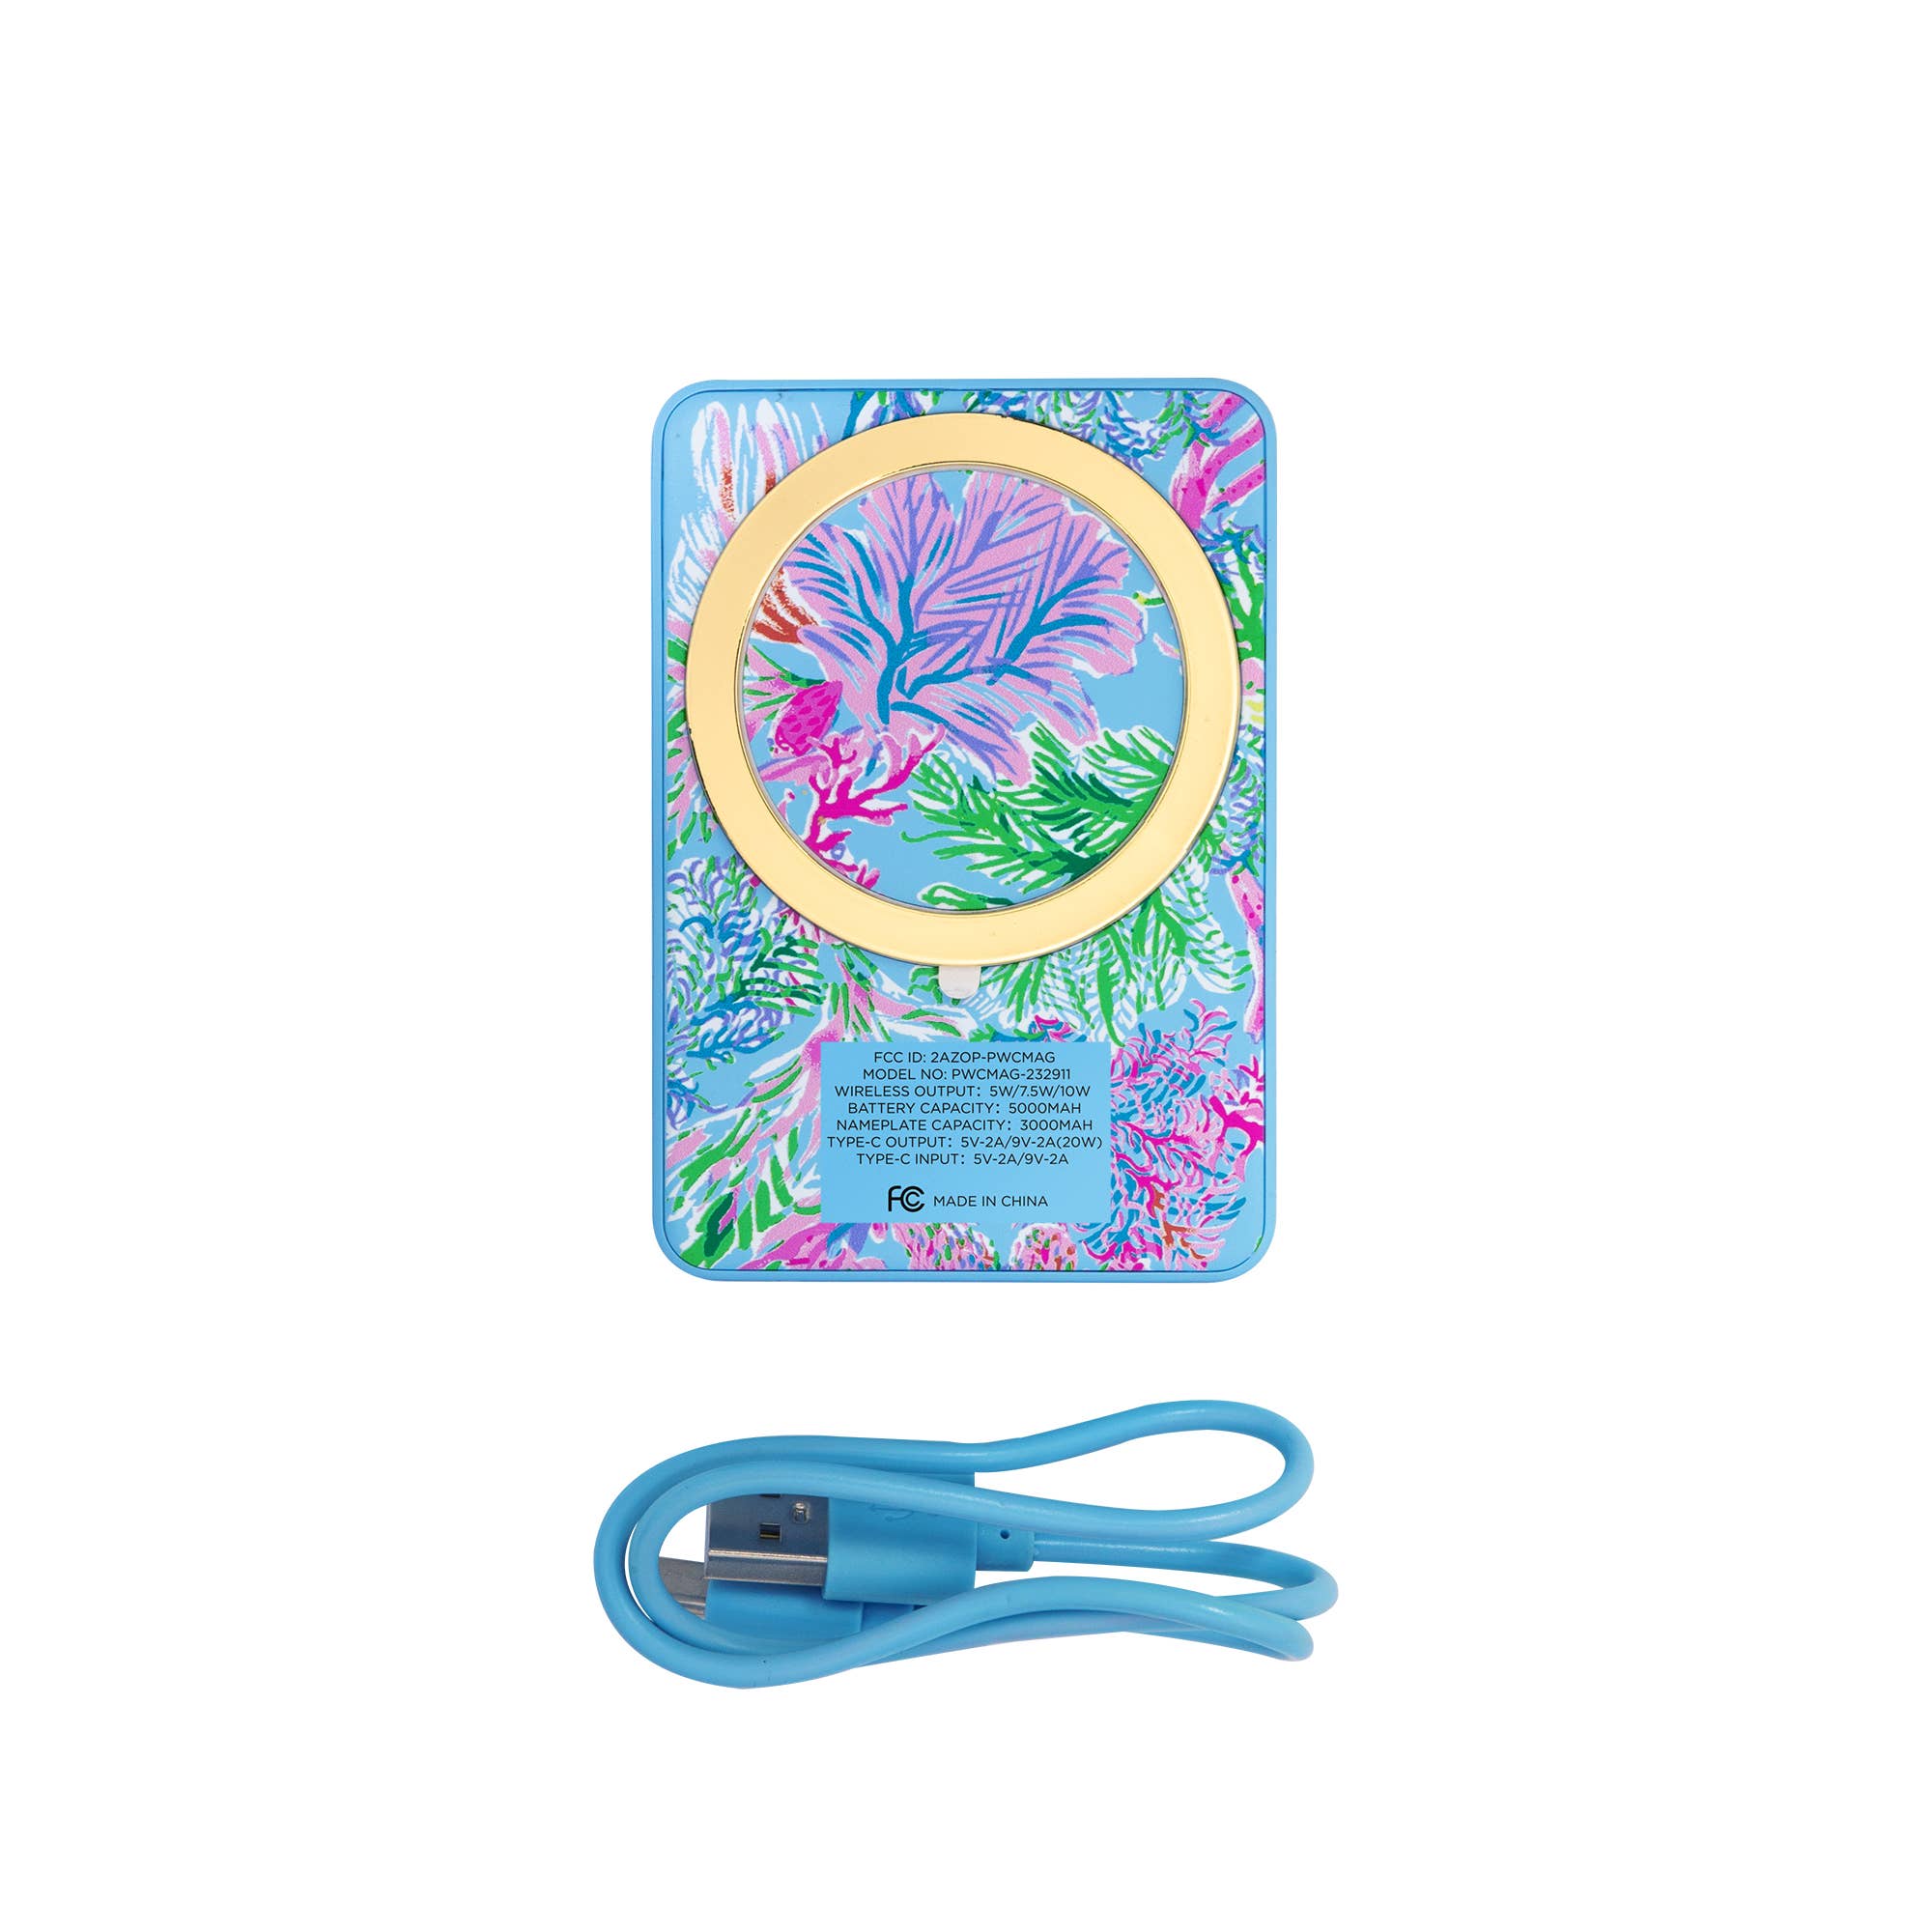 Lilly Pulitzer Portable Wireless Charger - Pink